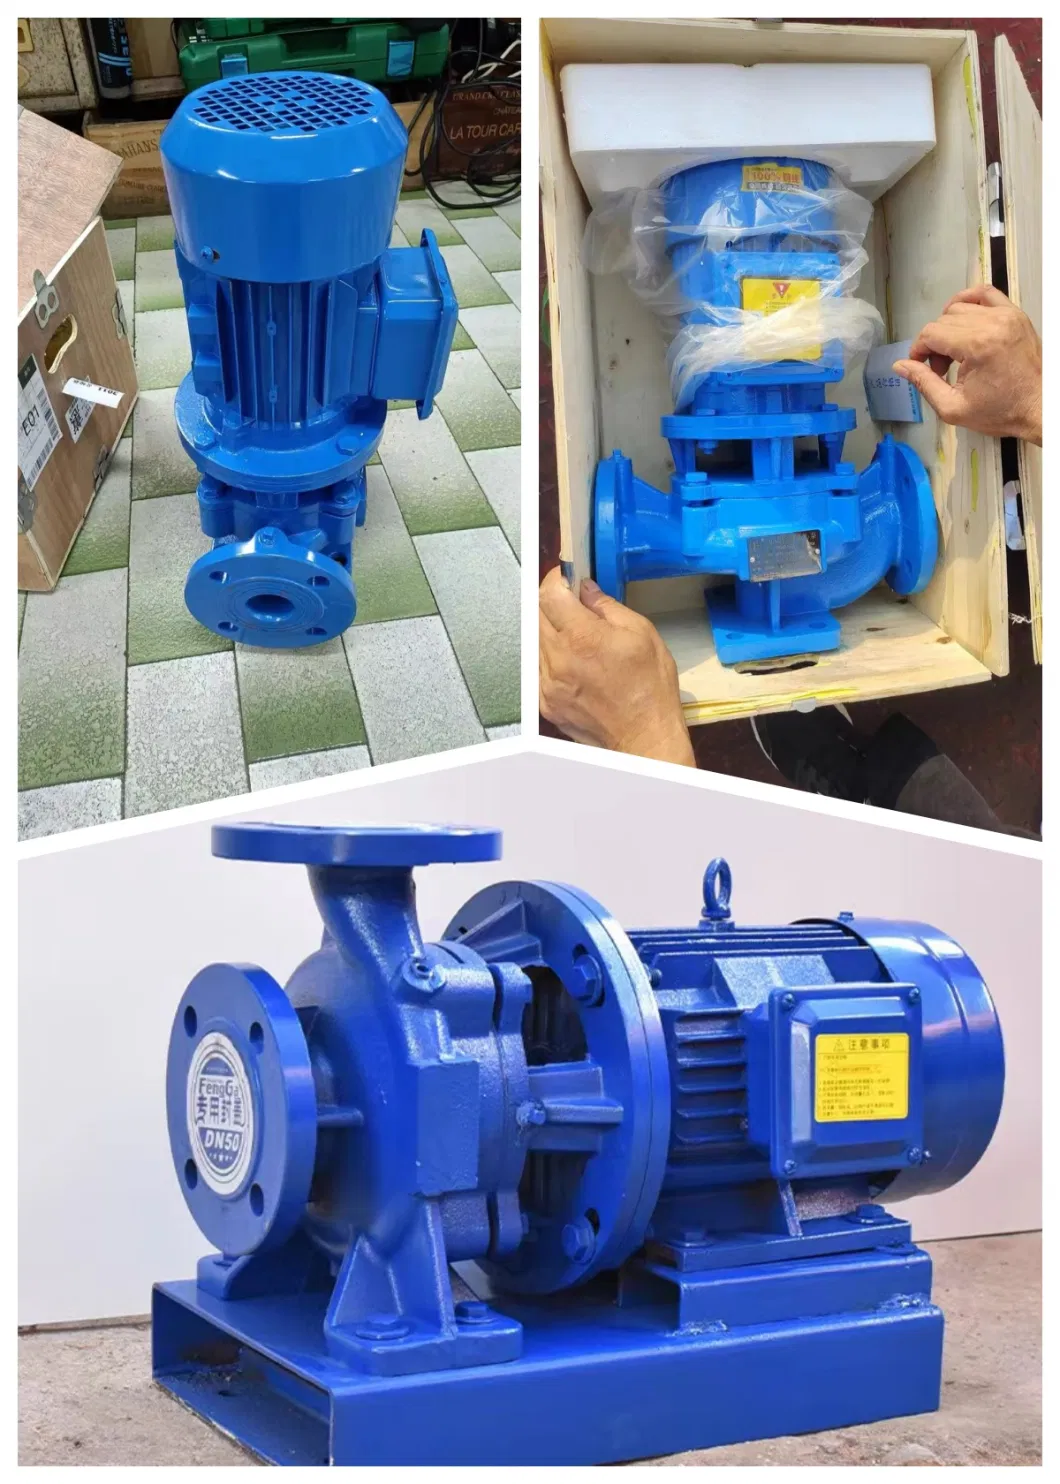 Vertical Pipe Centrifugal Pump Domestic Hot Water Single Stage Single Suction